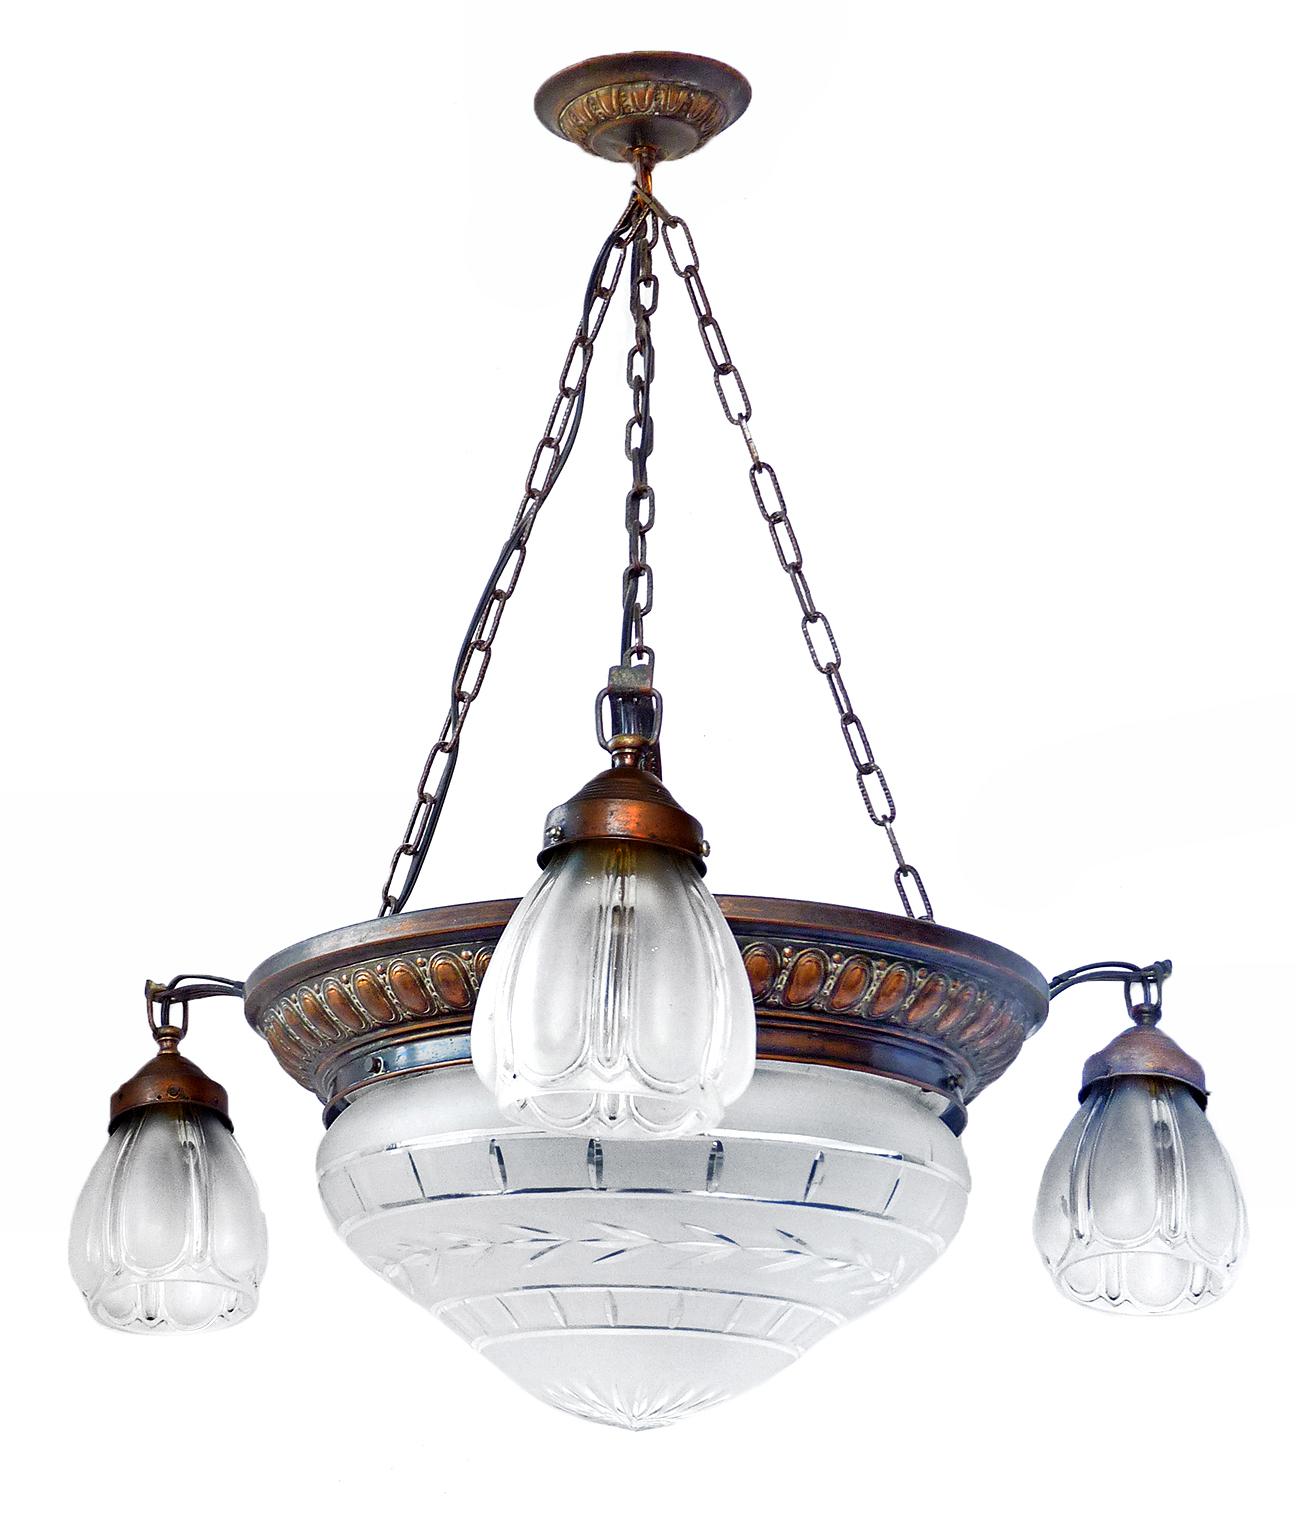 An unusual antique French Art Deco wheel cut crystal glass globes 4-light chandelier,
circa 1920s.
Four bulbs E27/ good working condition.
Measures: Glass bowl 20 x 22 cm.
Glass globes 13 x 15 cm.
Assembly required. Bulbs not included.